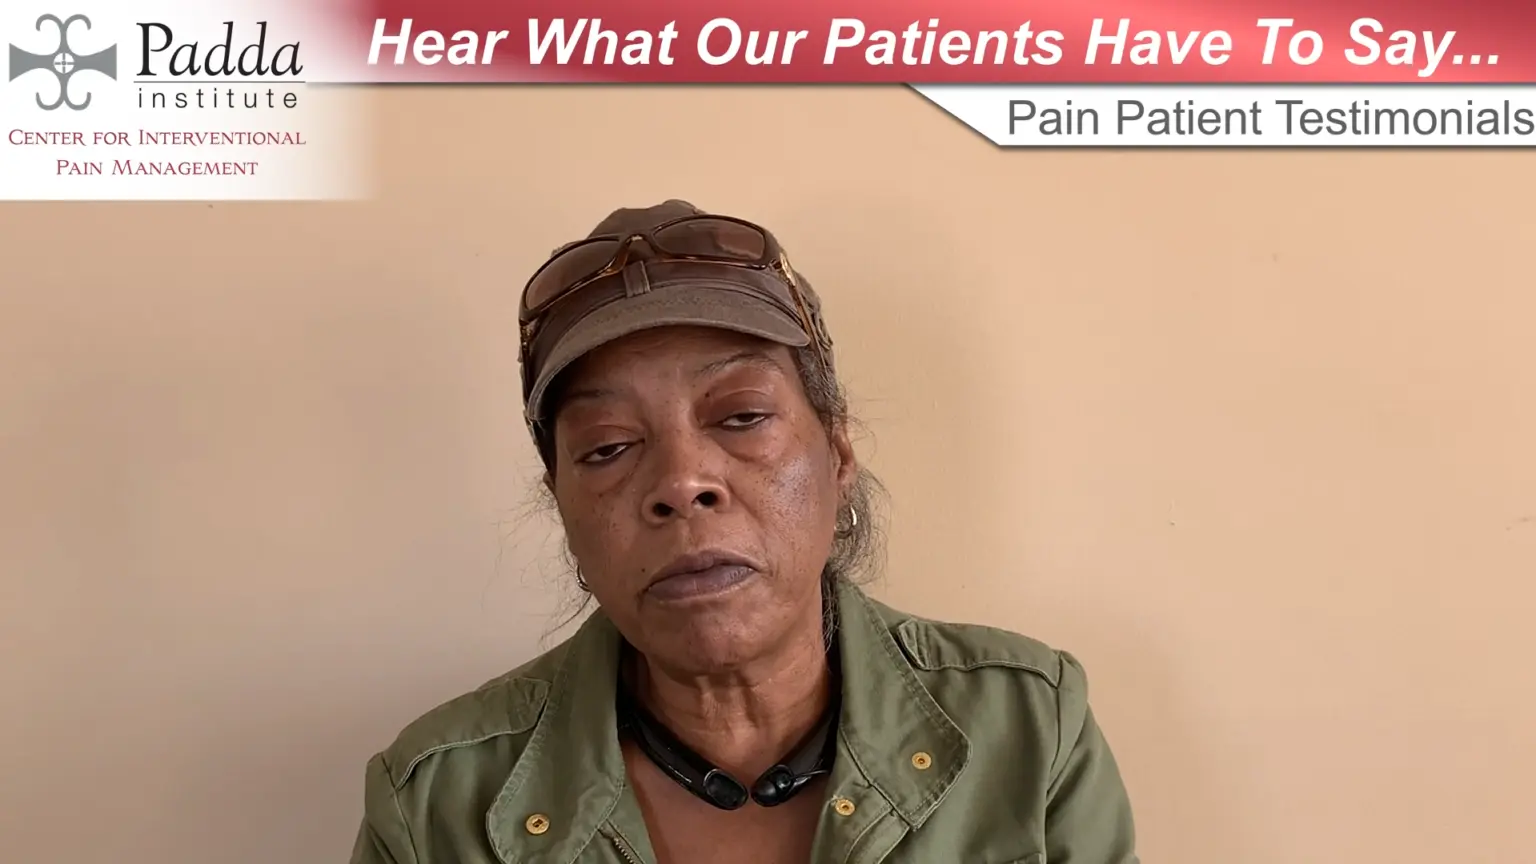 Patient Feedback on Pain Treatment - Padda Institute